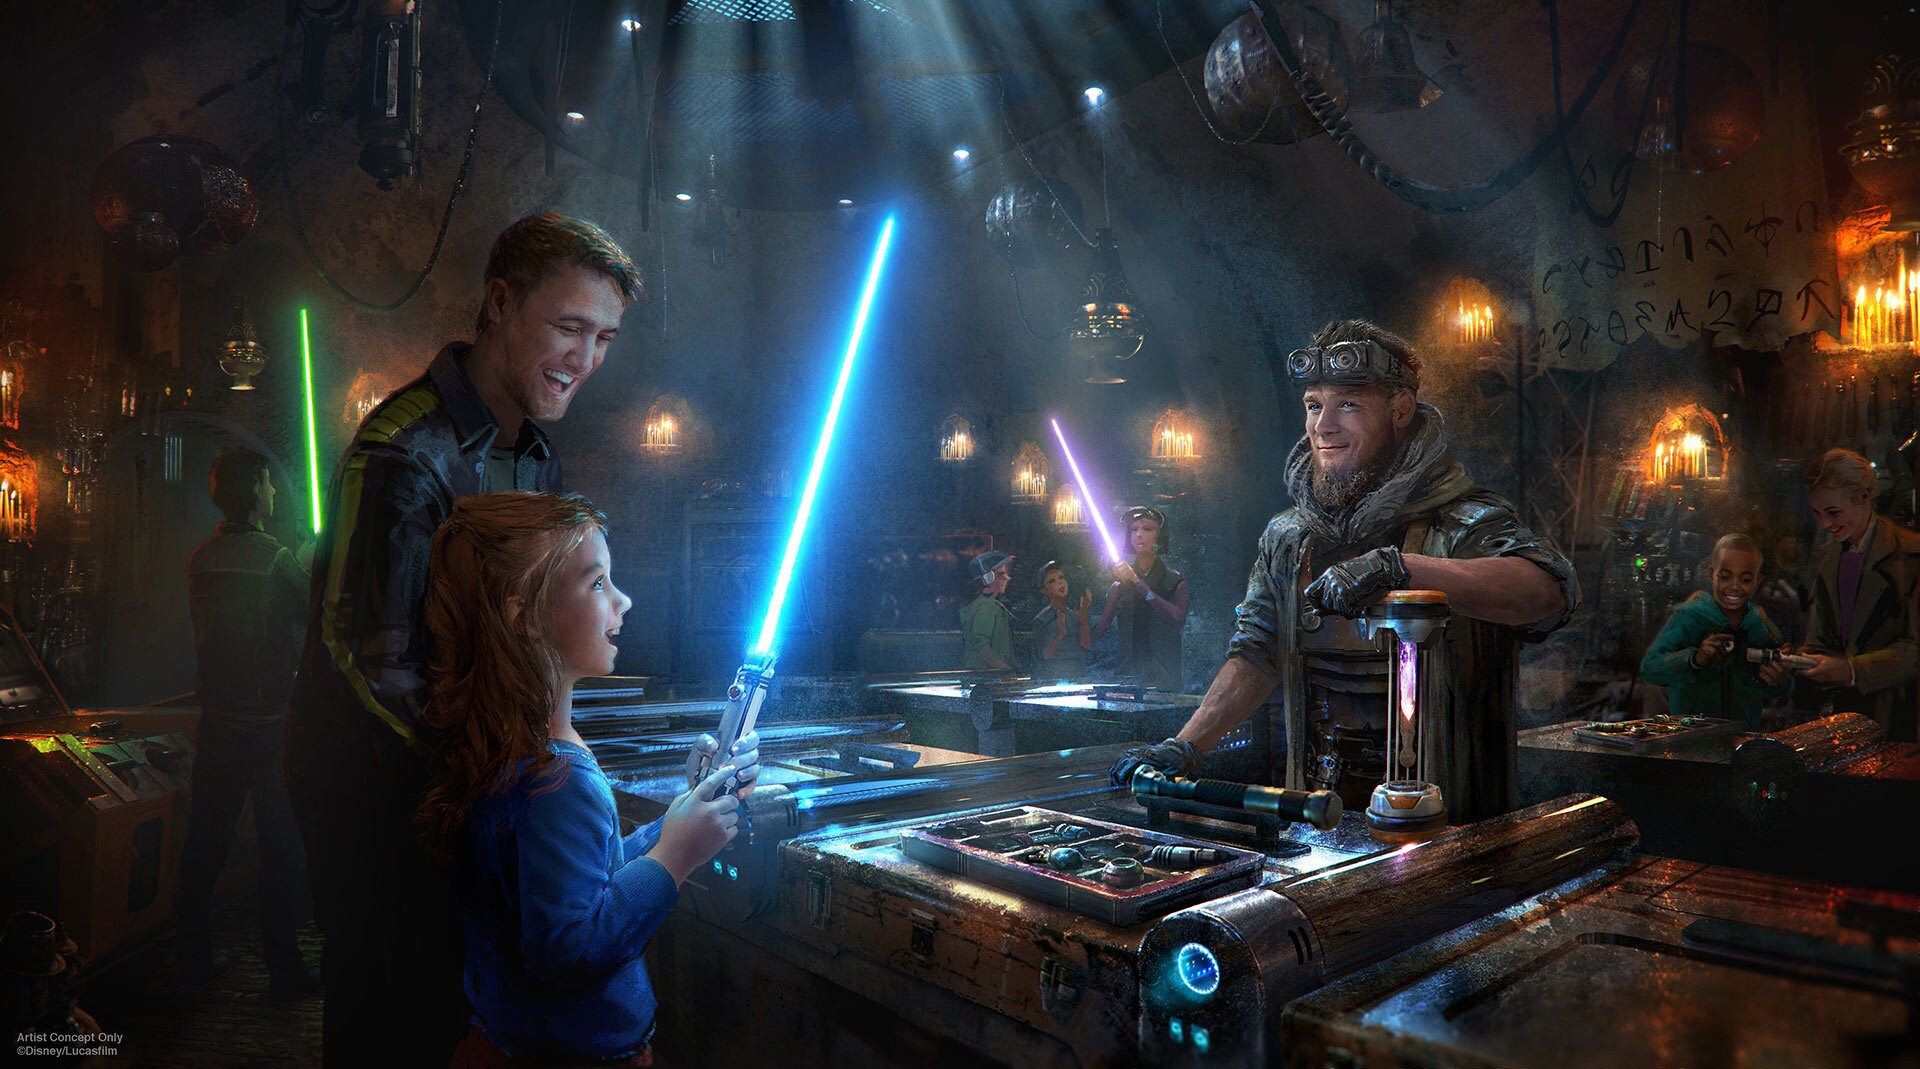 Build your own lightsaber at Star Wars: Galaxy's Edge